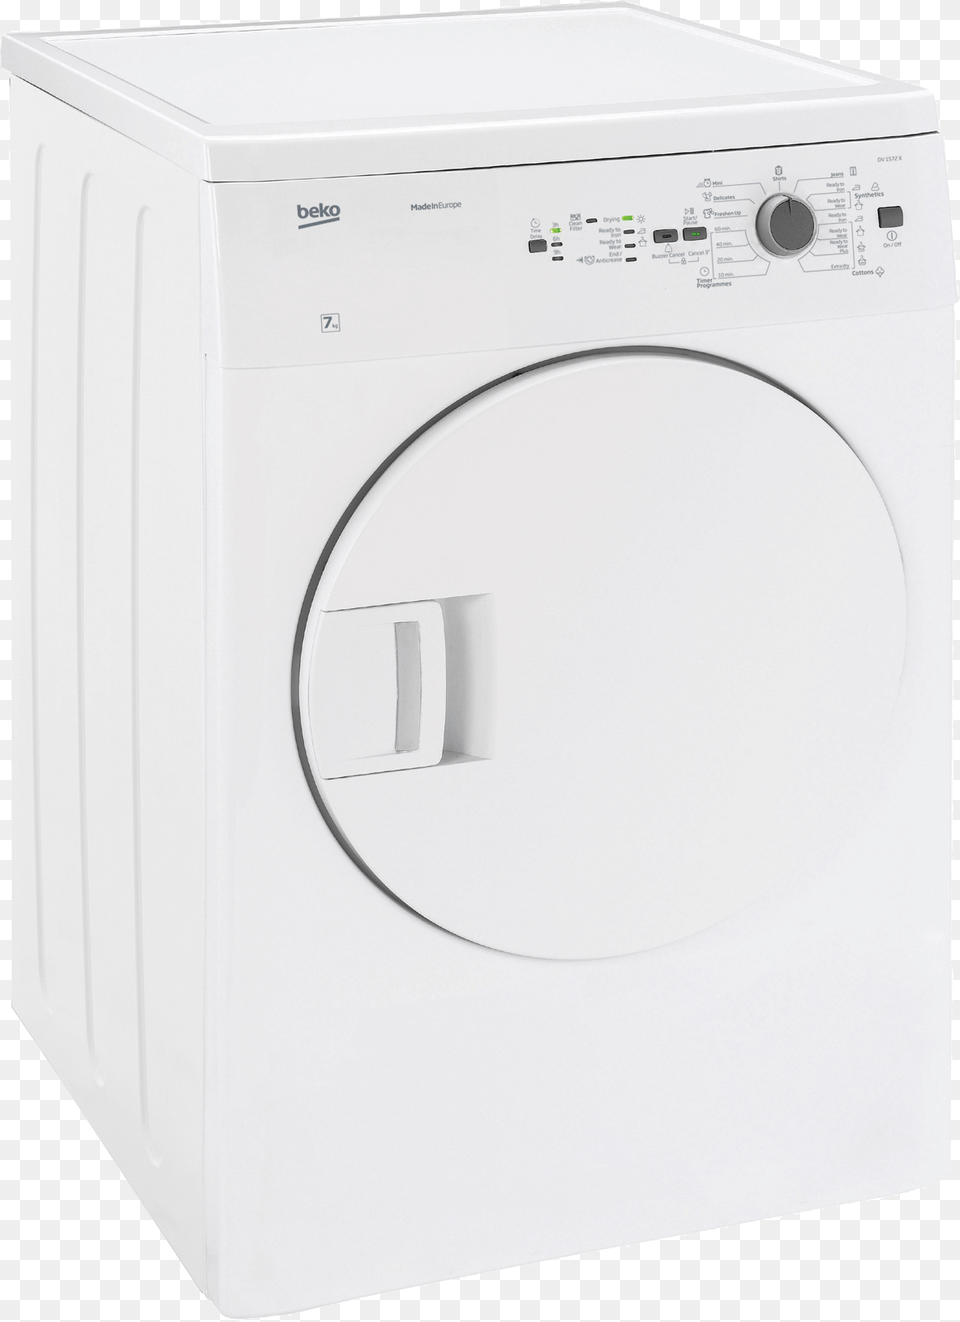 Washing Machine, Appliance, Device, Electrical Device, Washer Png Image